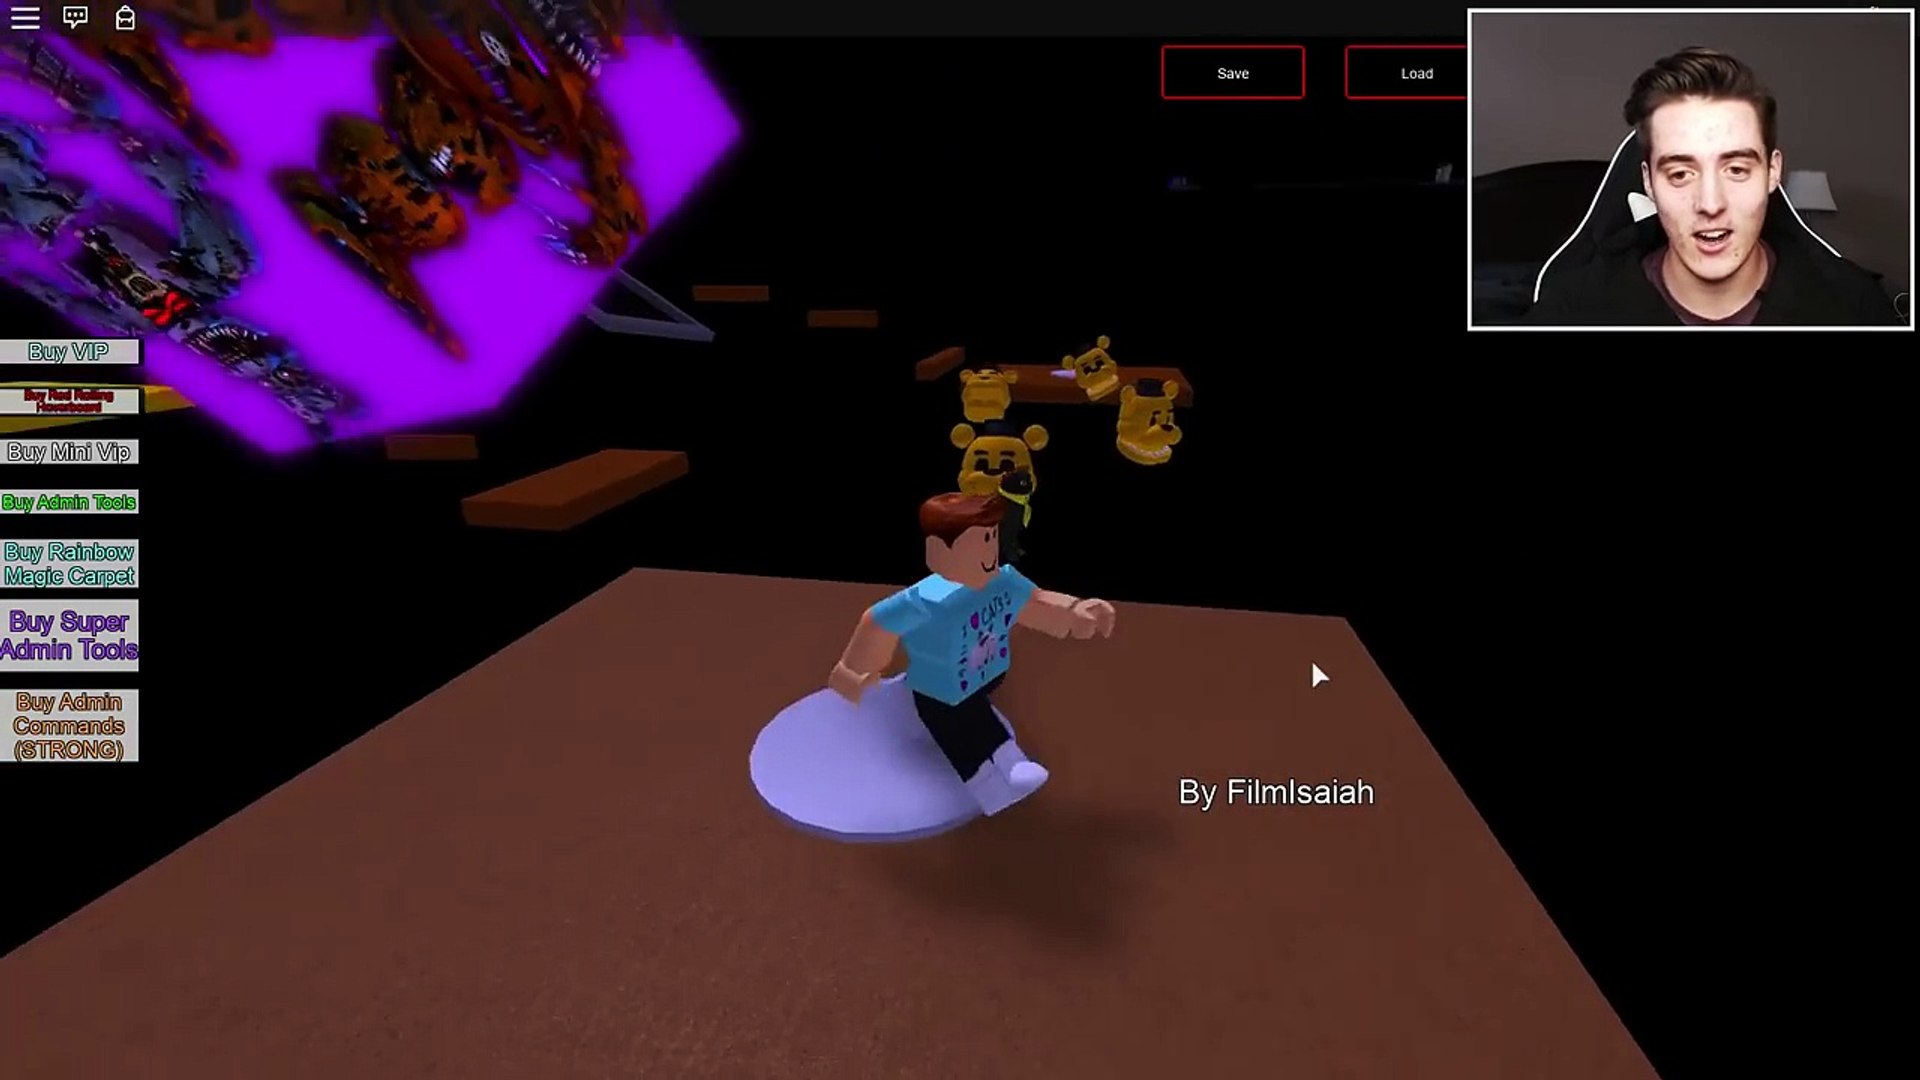 Escape Five Nights At Freddys Roblox - creating and becoming funtime fnaf 6 animatronics in roblox animatronic world